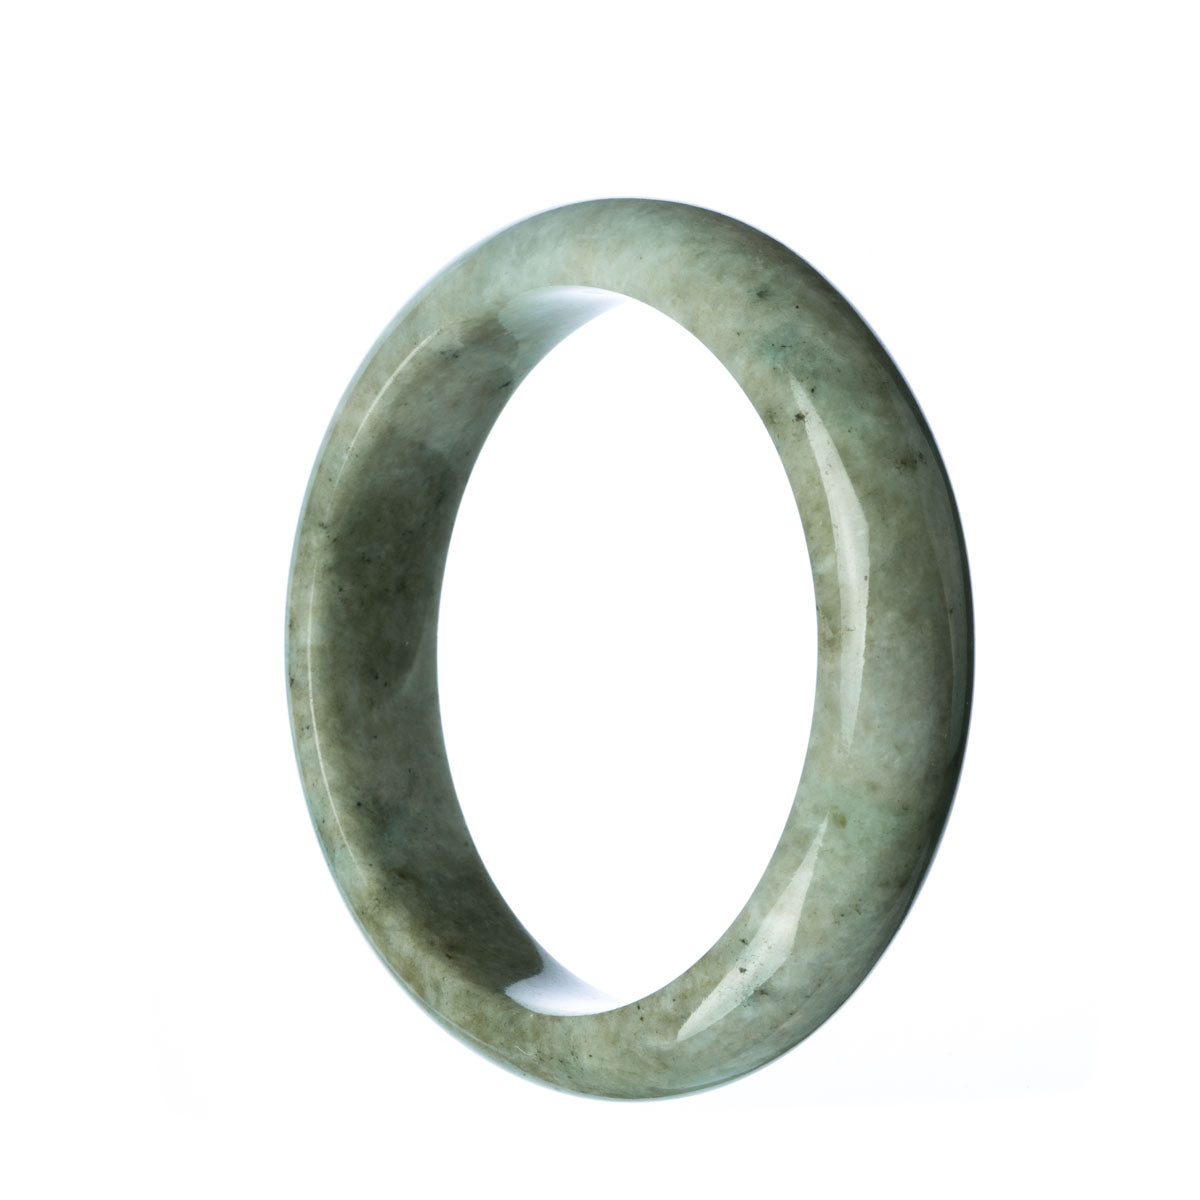 Close-up of a grey jade bangle bracelet in a half moon shape, showcasing its genuine grade A quality. The bracelet measures 59mm in diameter and is from the brand MAYS.